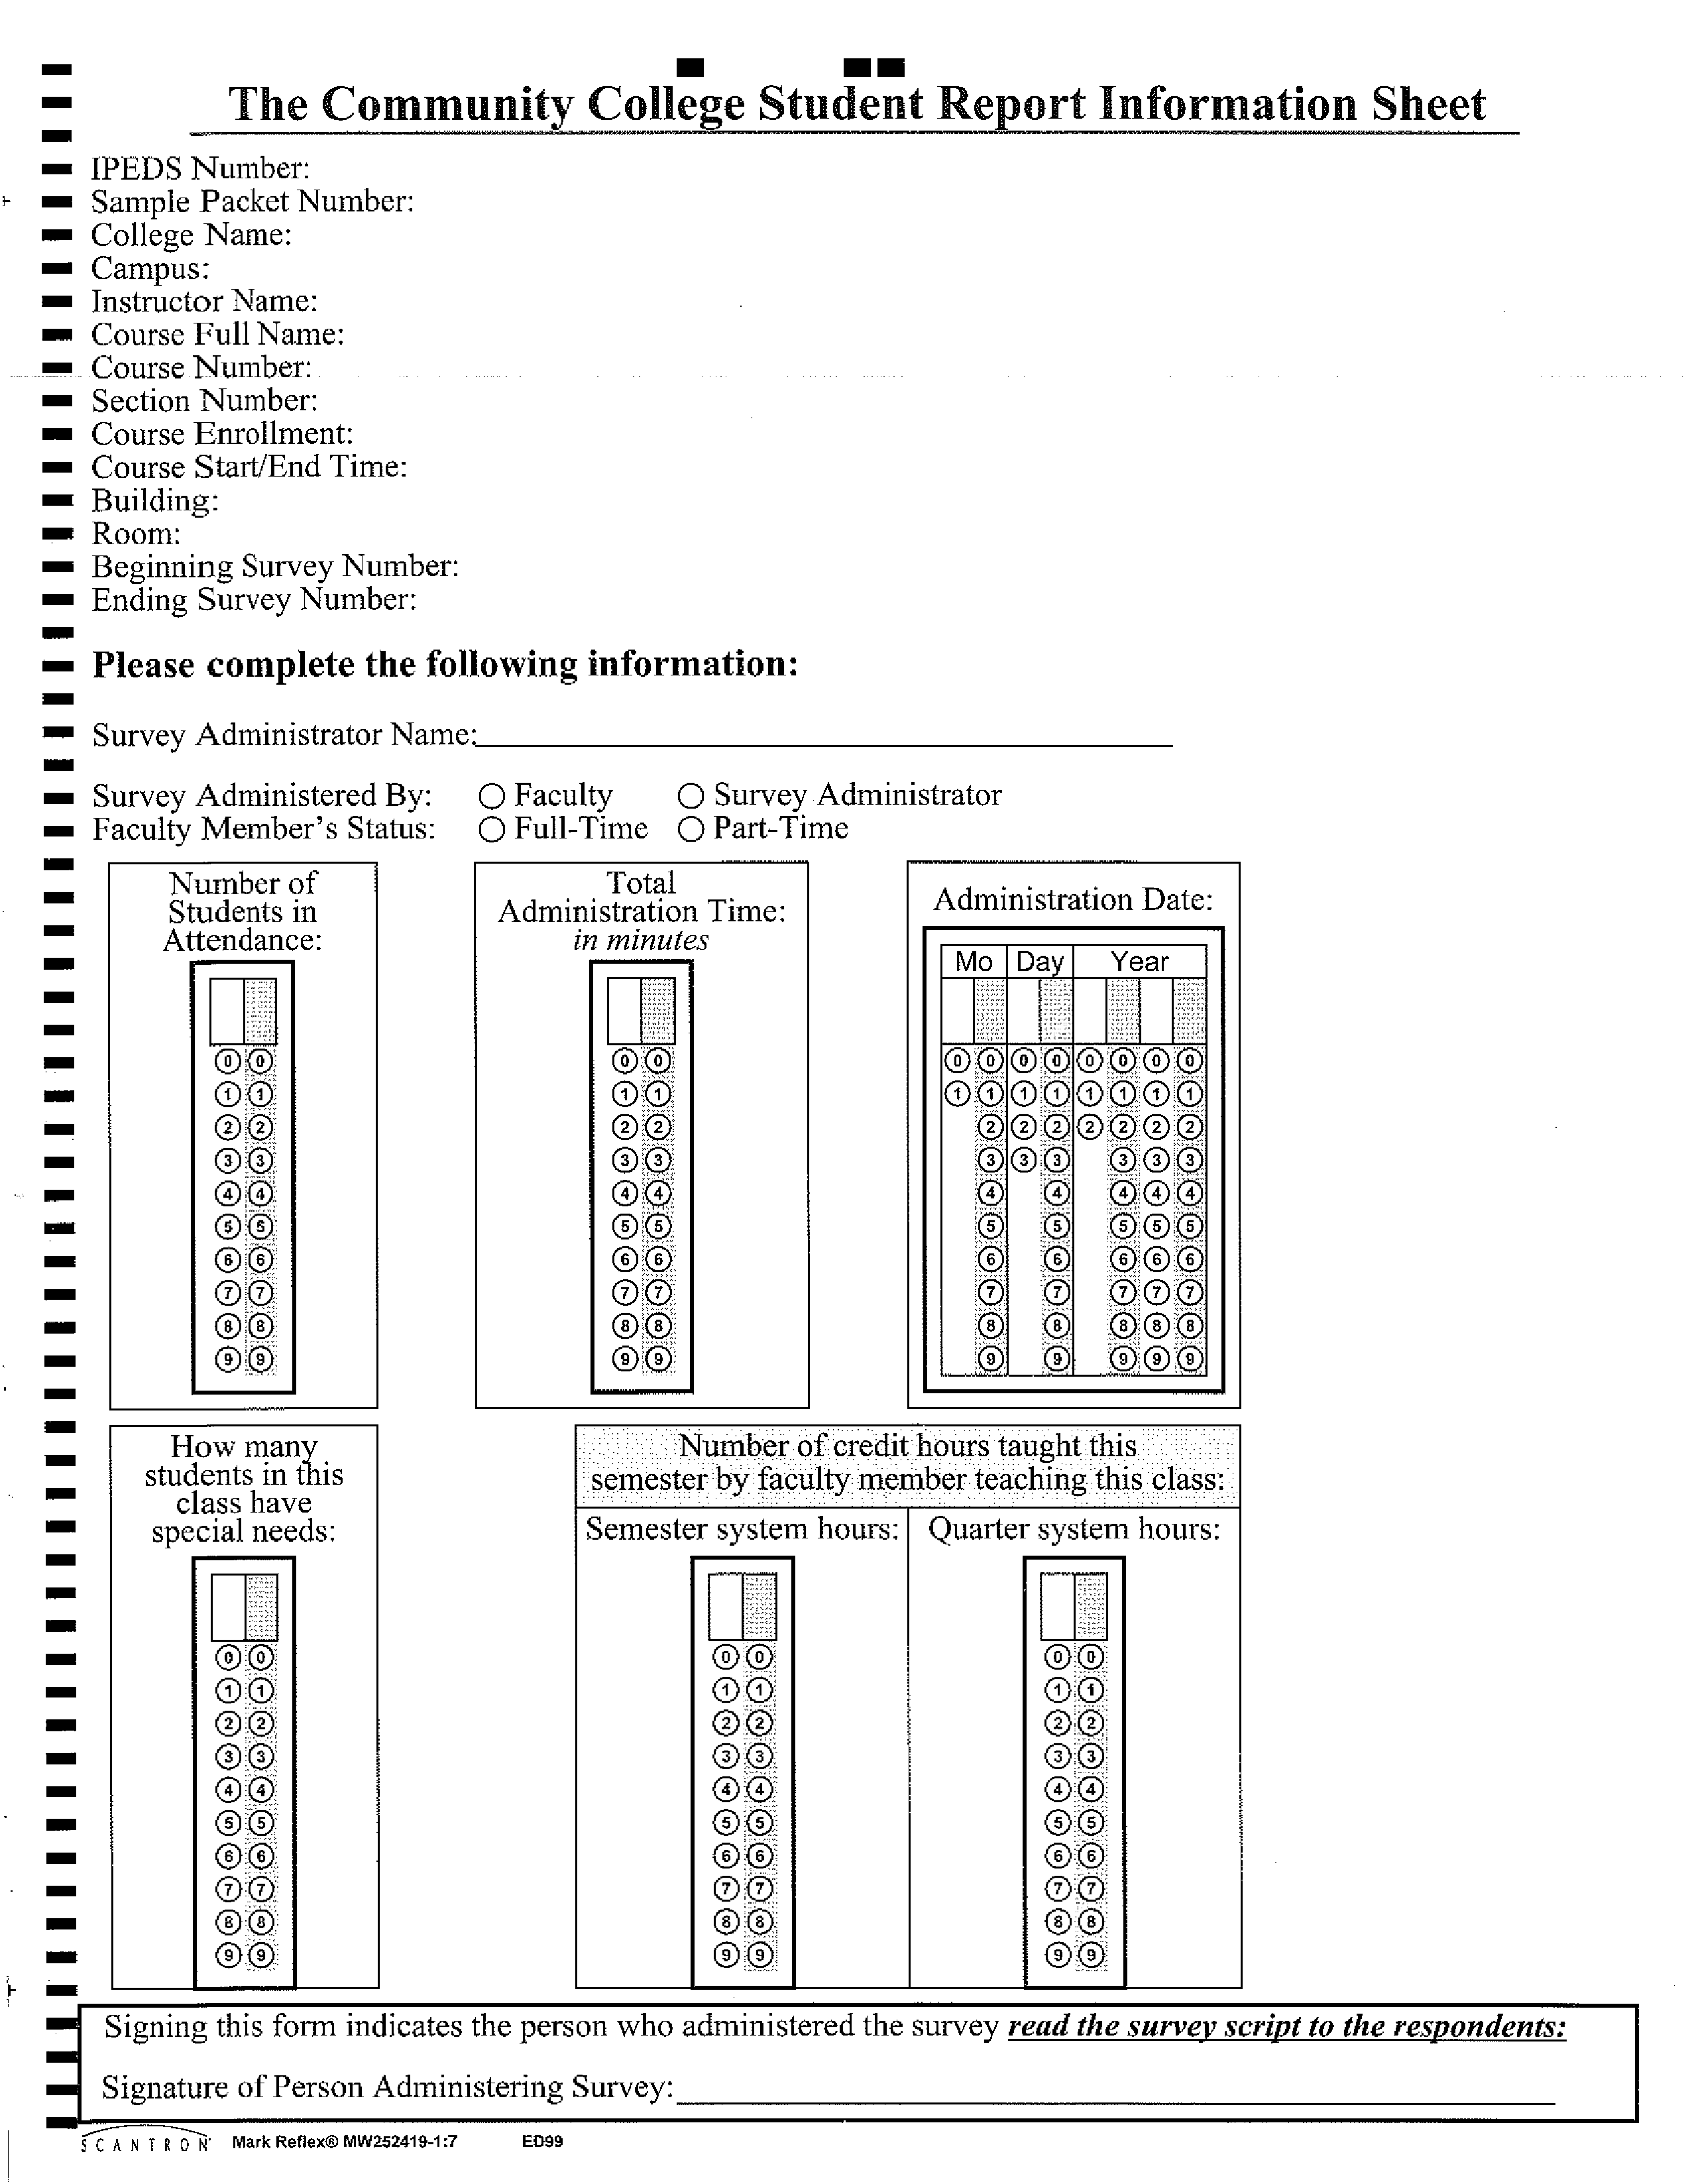 College Student Report Information Sheet main image